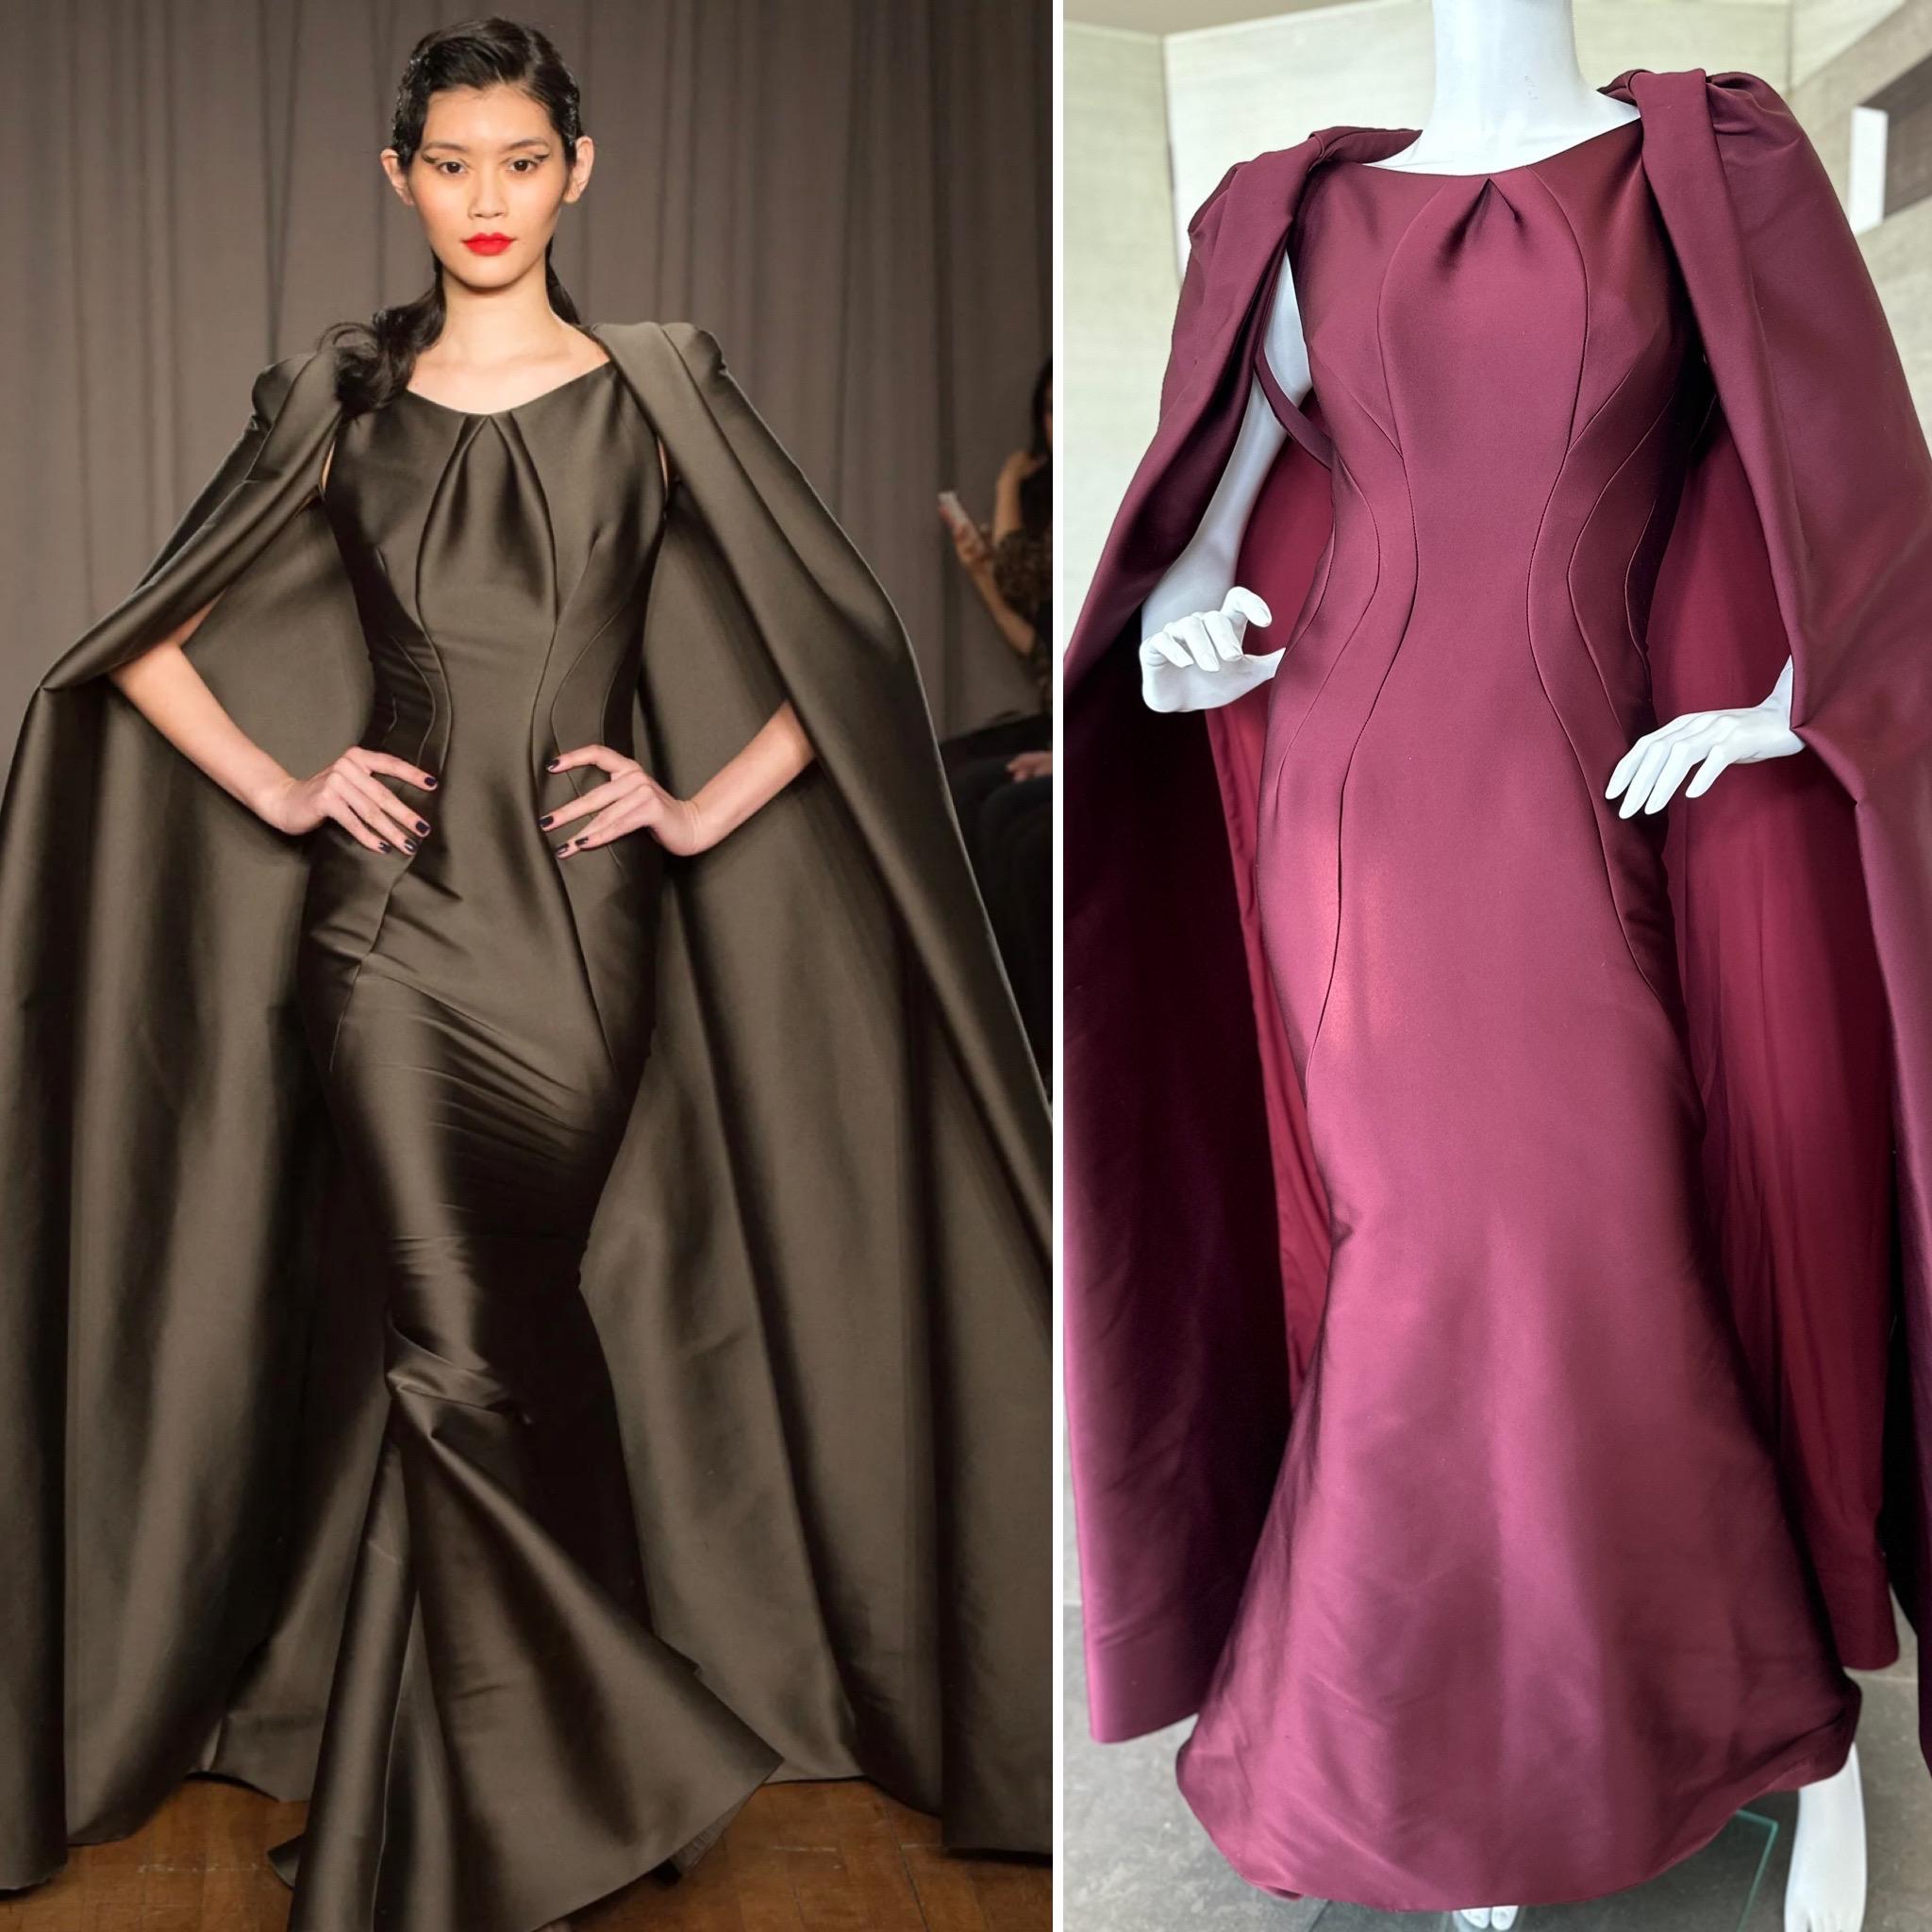 
Zac Posen Dramatic Vintage Fishtail Mermaid Evening Dress with Matching Cape .
Shown on the runway in brown, this burgundy version is even more resplendent,
From Fall 2014, which was presented just as the Met Museum was opening it's Costume